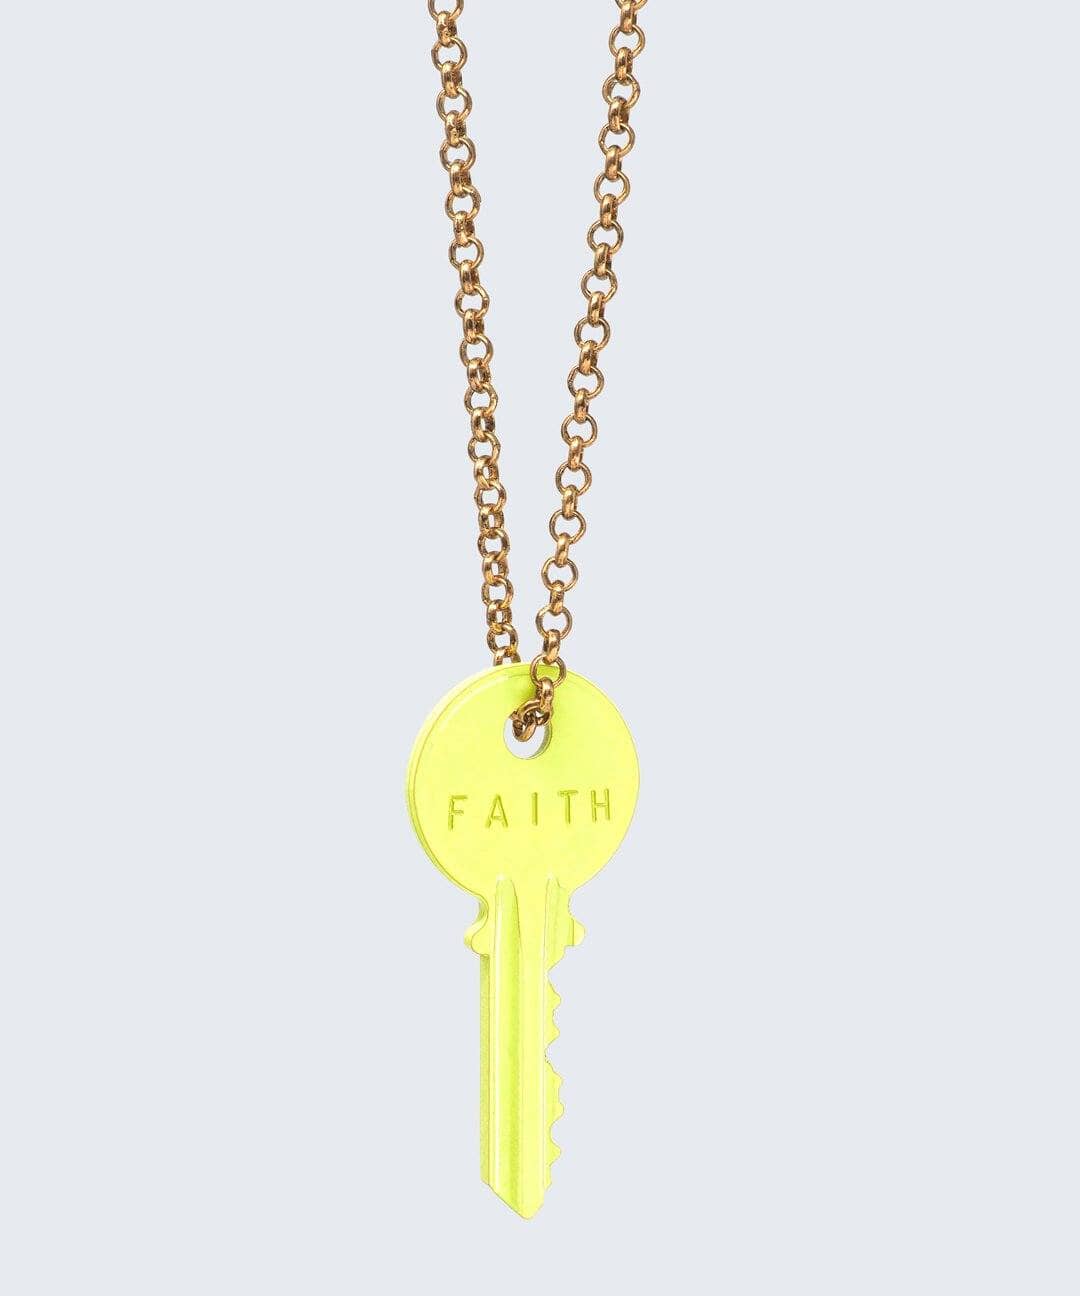 N - Neon Yellow Classic Ball Chain Key Necklace Necklaces The Giving Keys 